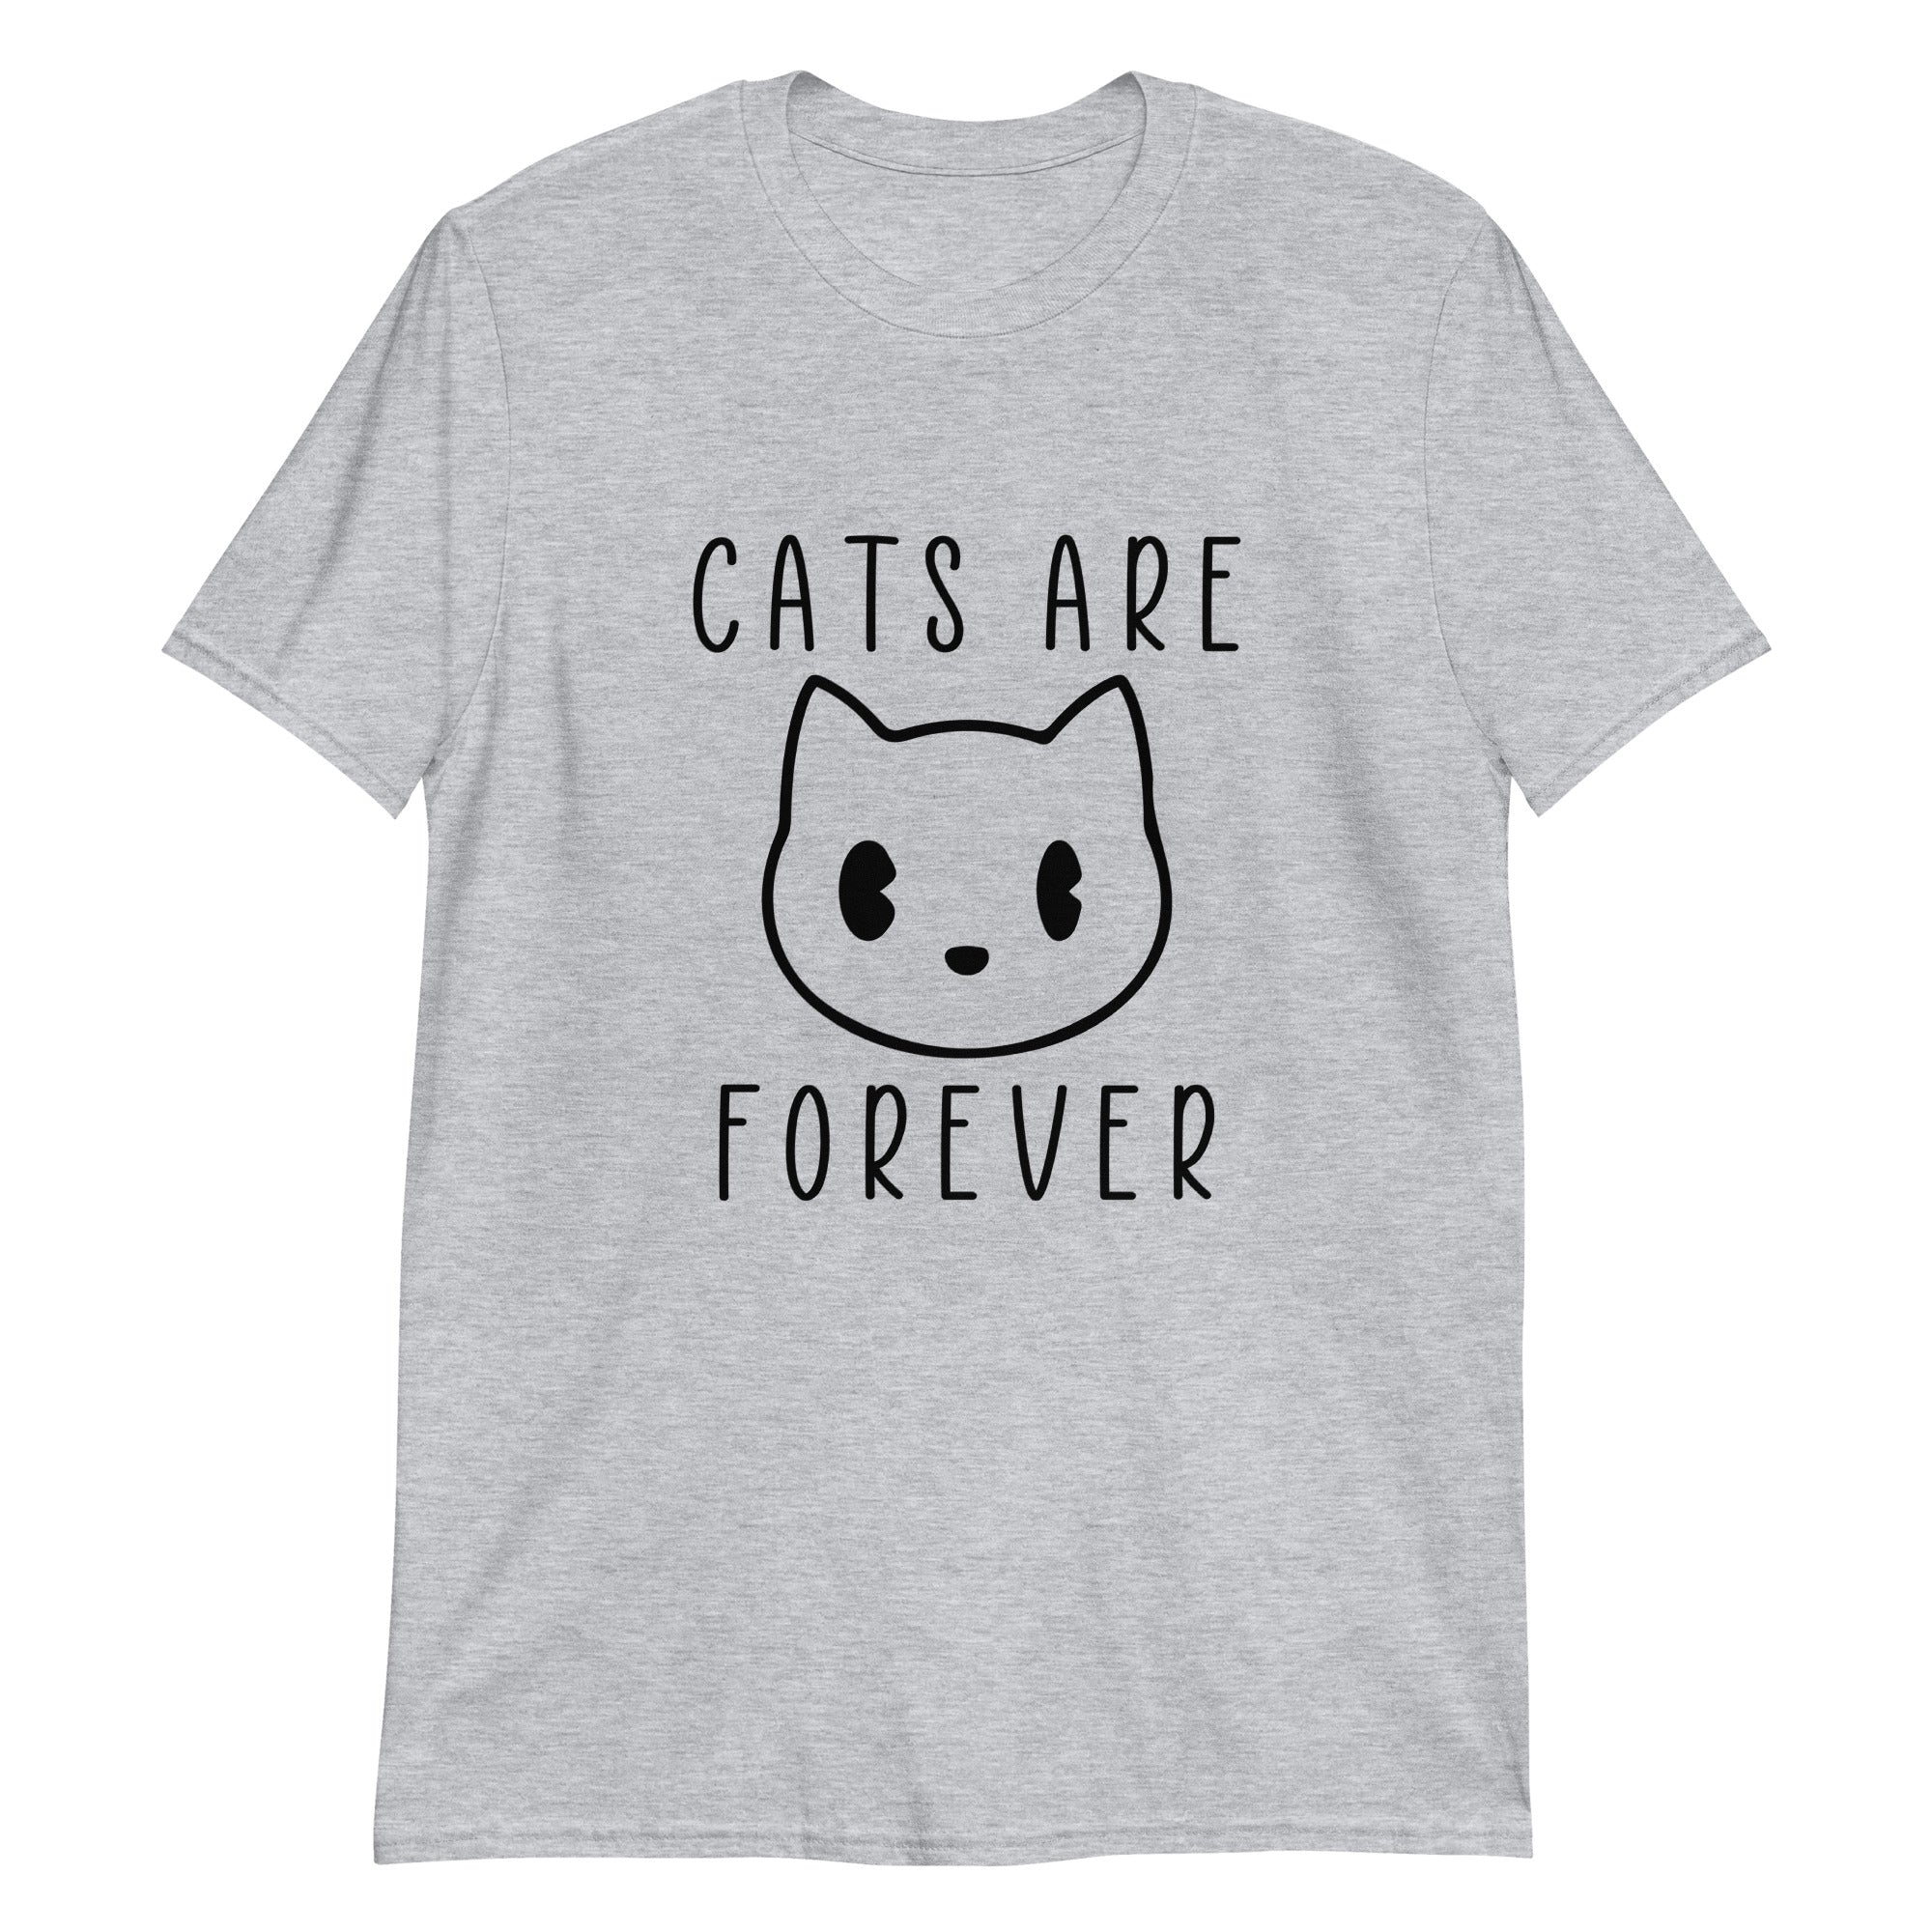 Cats are Forever Short-Sleeve Unisex T-Shirt